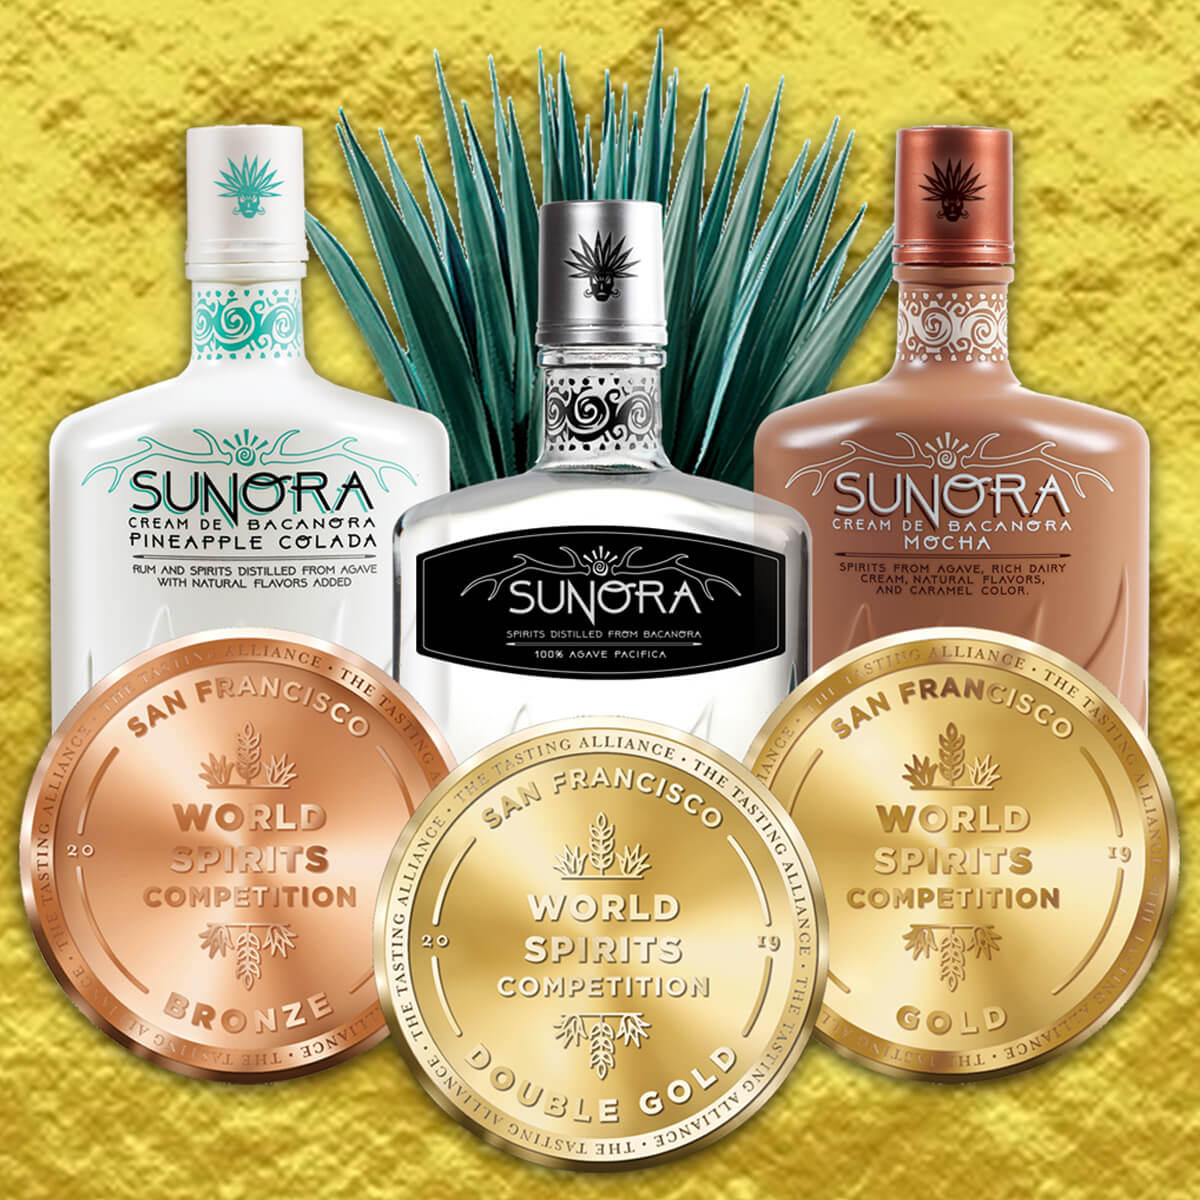 Sunora Bacanora Wins DOUBLE GOLD at The San Francisco World Spirits Competition